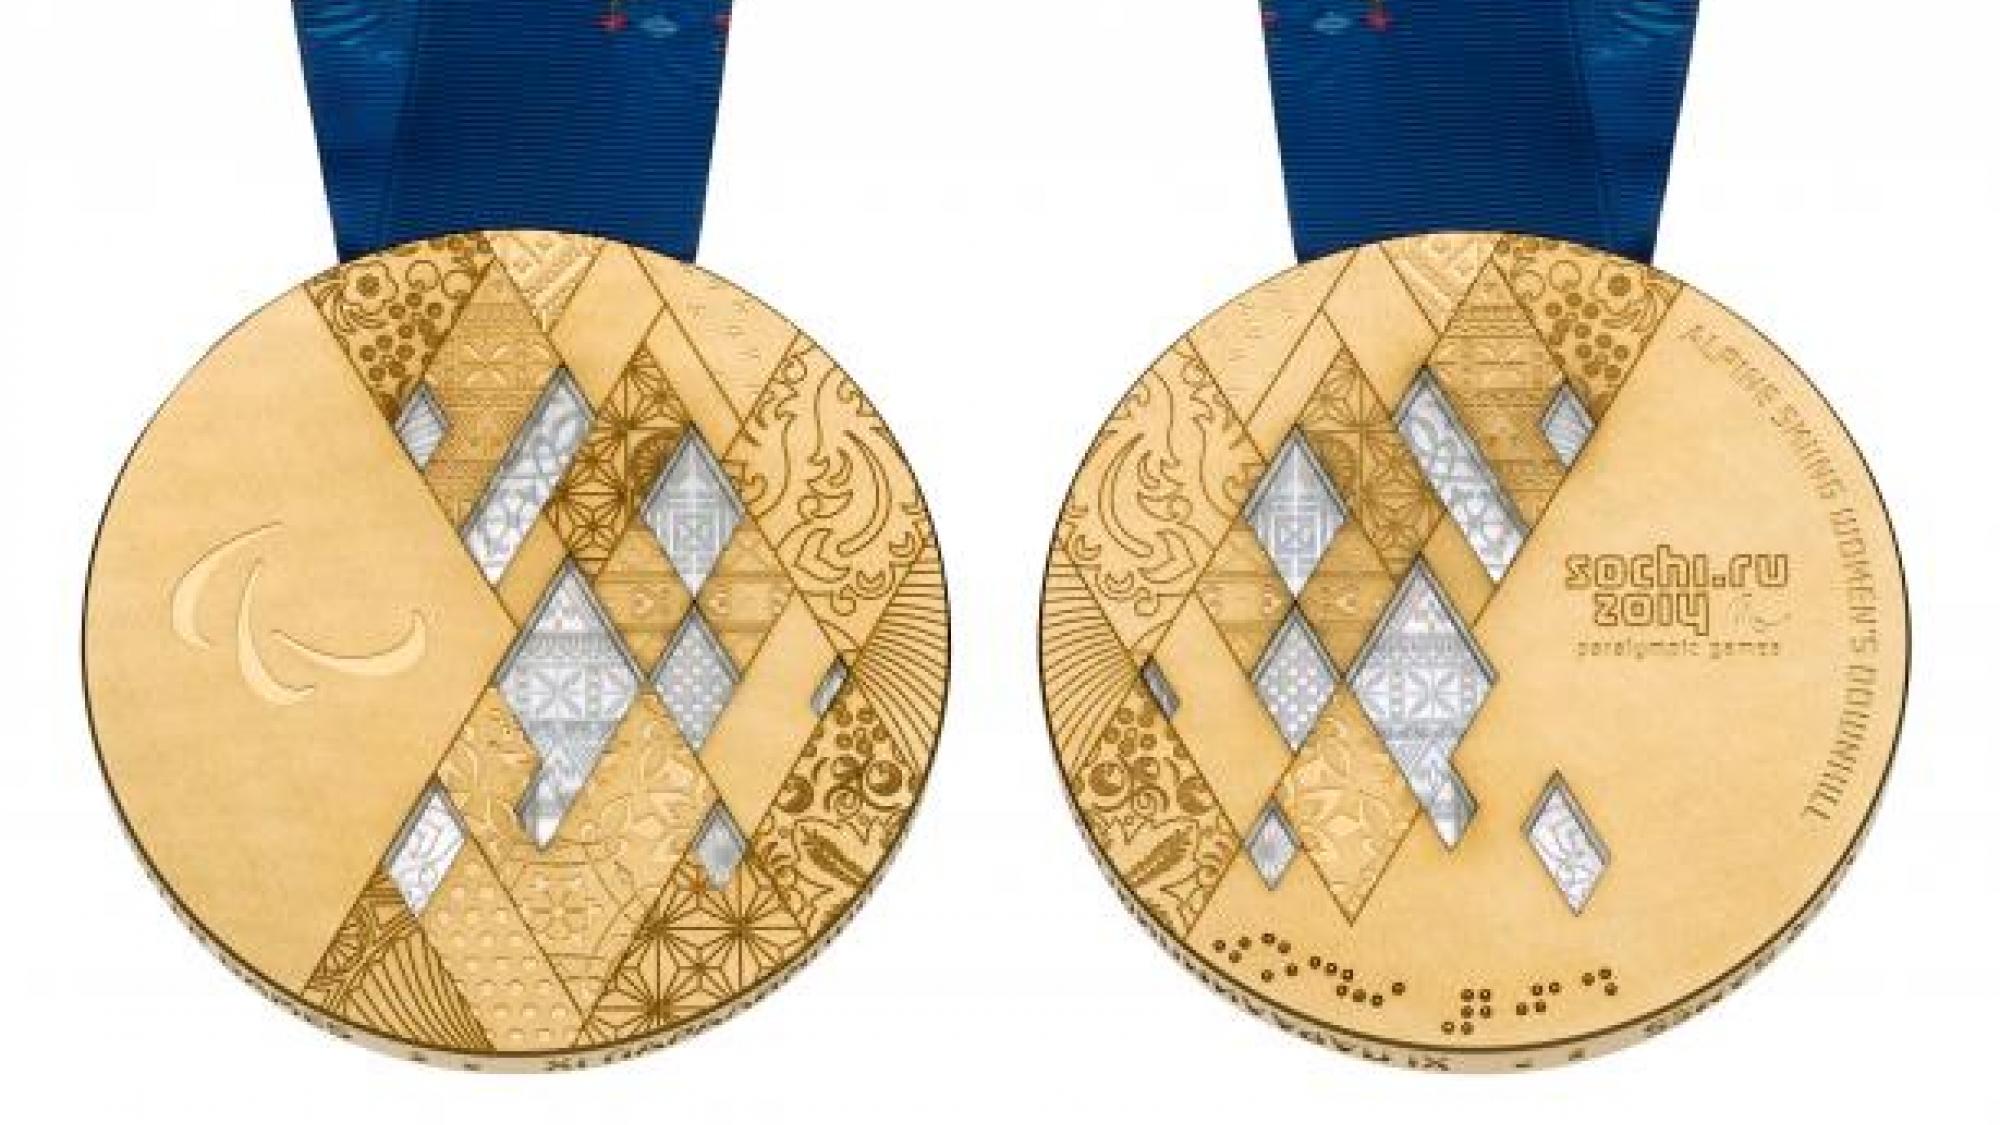 The medals of the Sochi 2014 Paralympic Winter Games